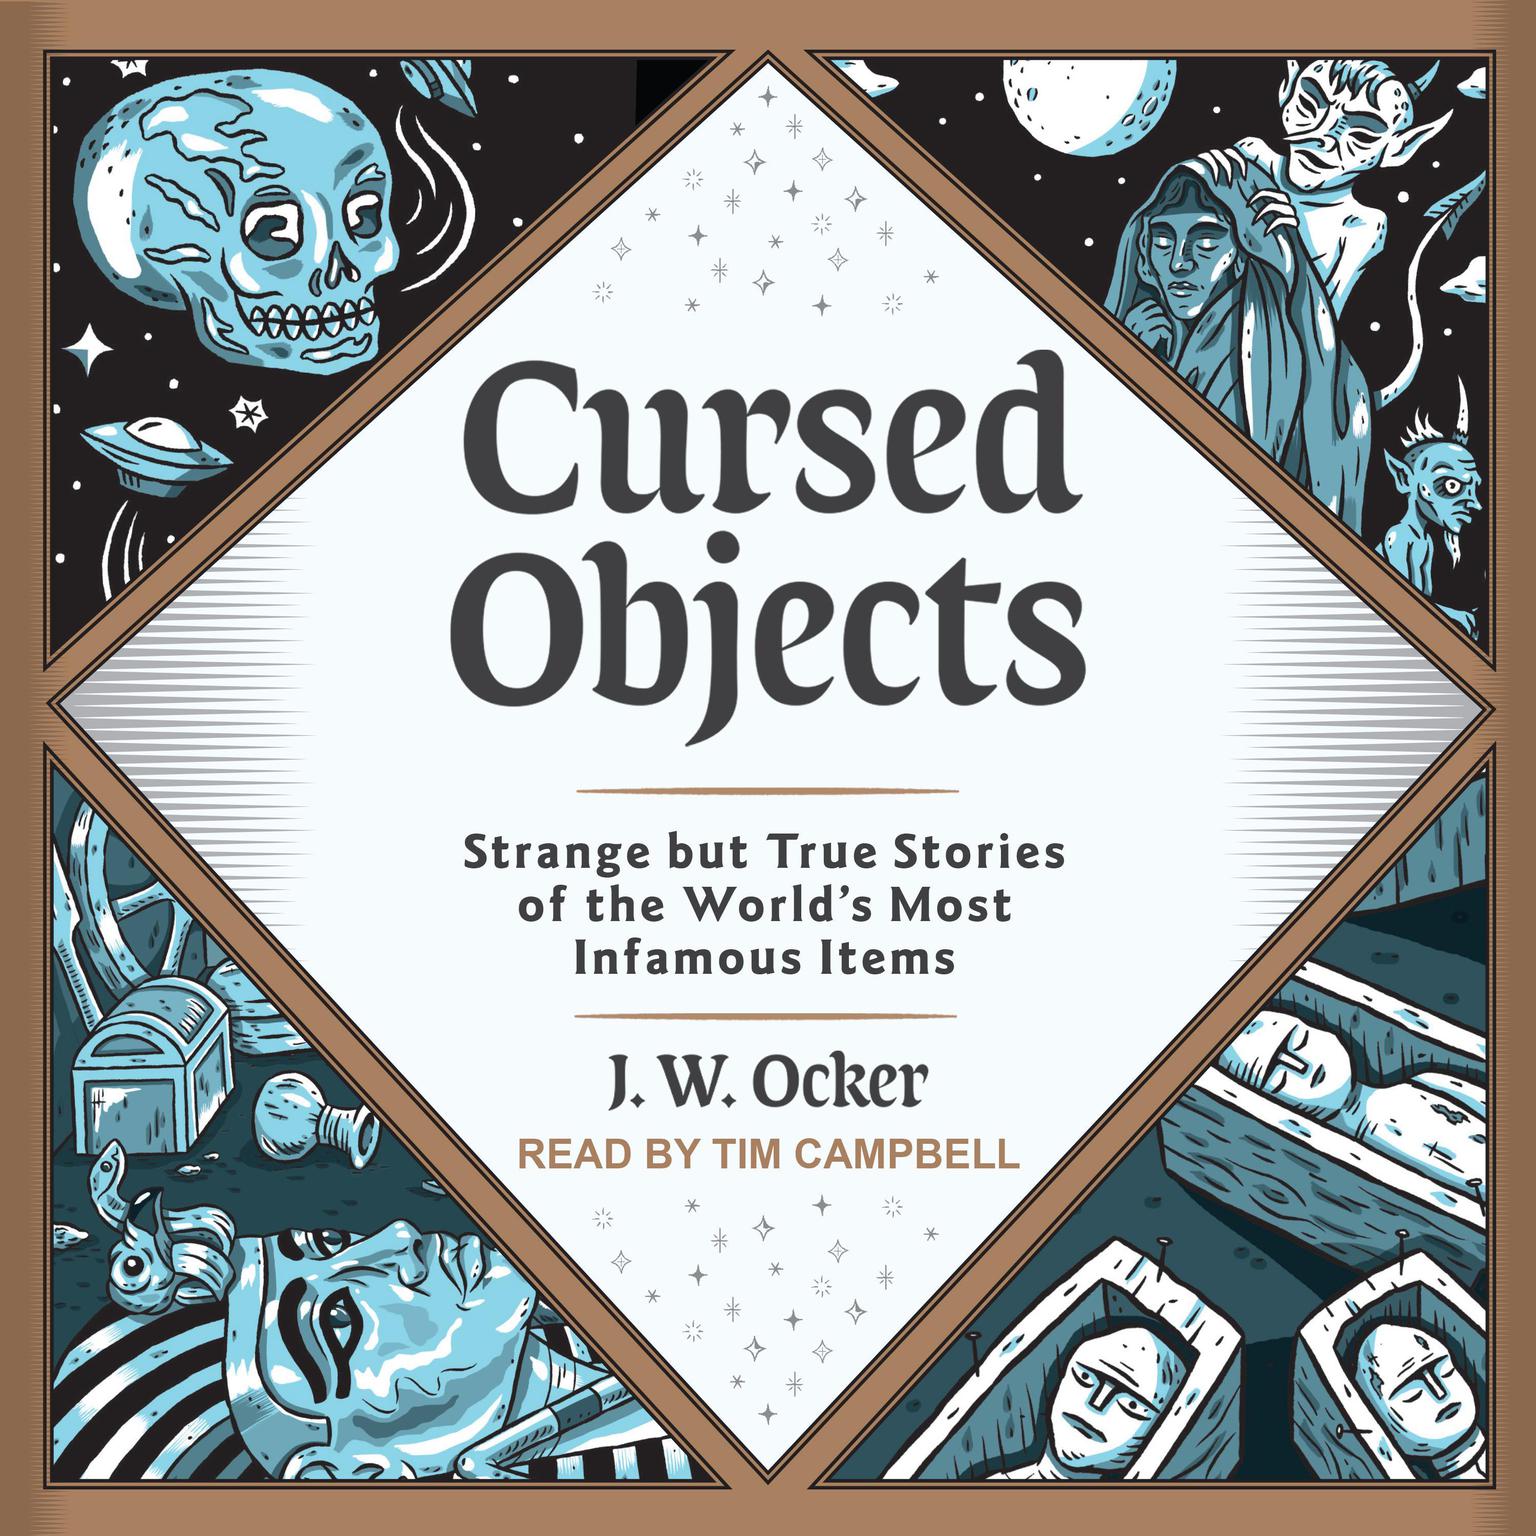 Cursed Objects: Strange but True Stories of the Worlds Most Infamous Items Audiobook, by J.W. Ocker